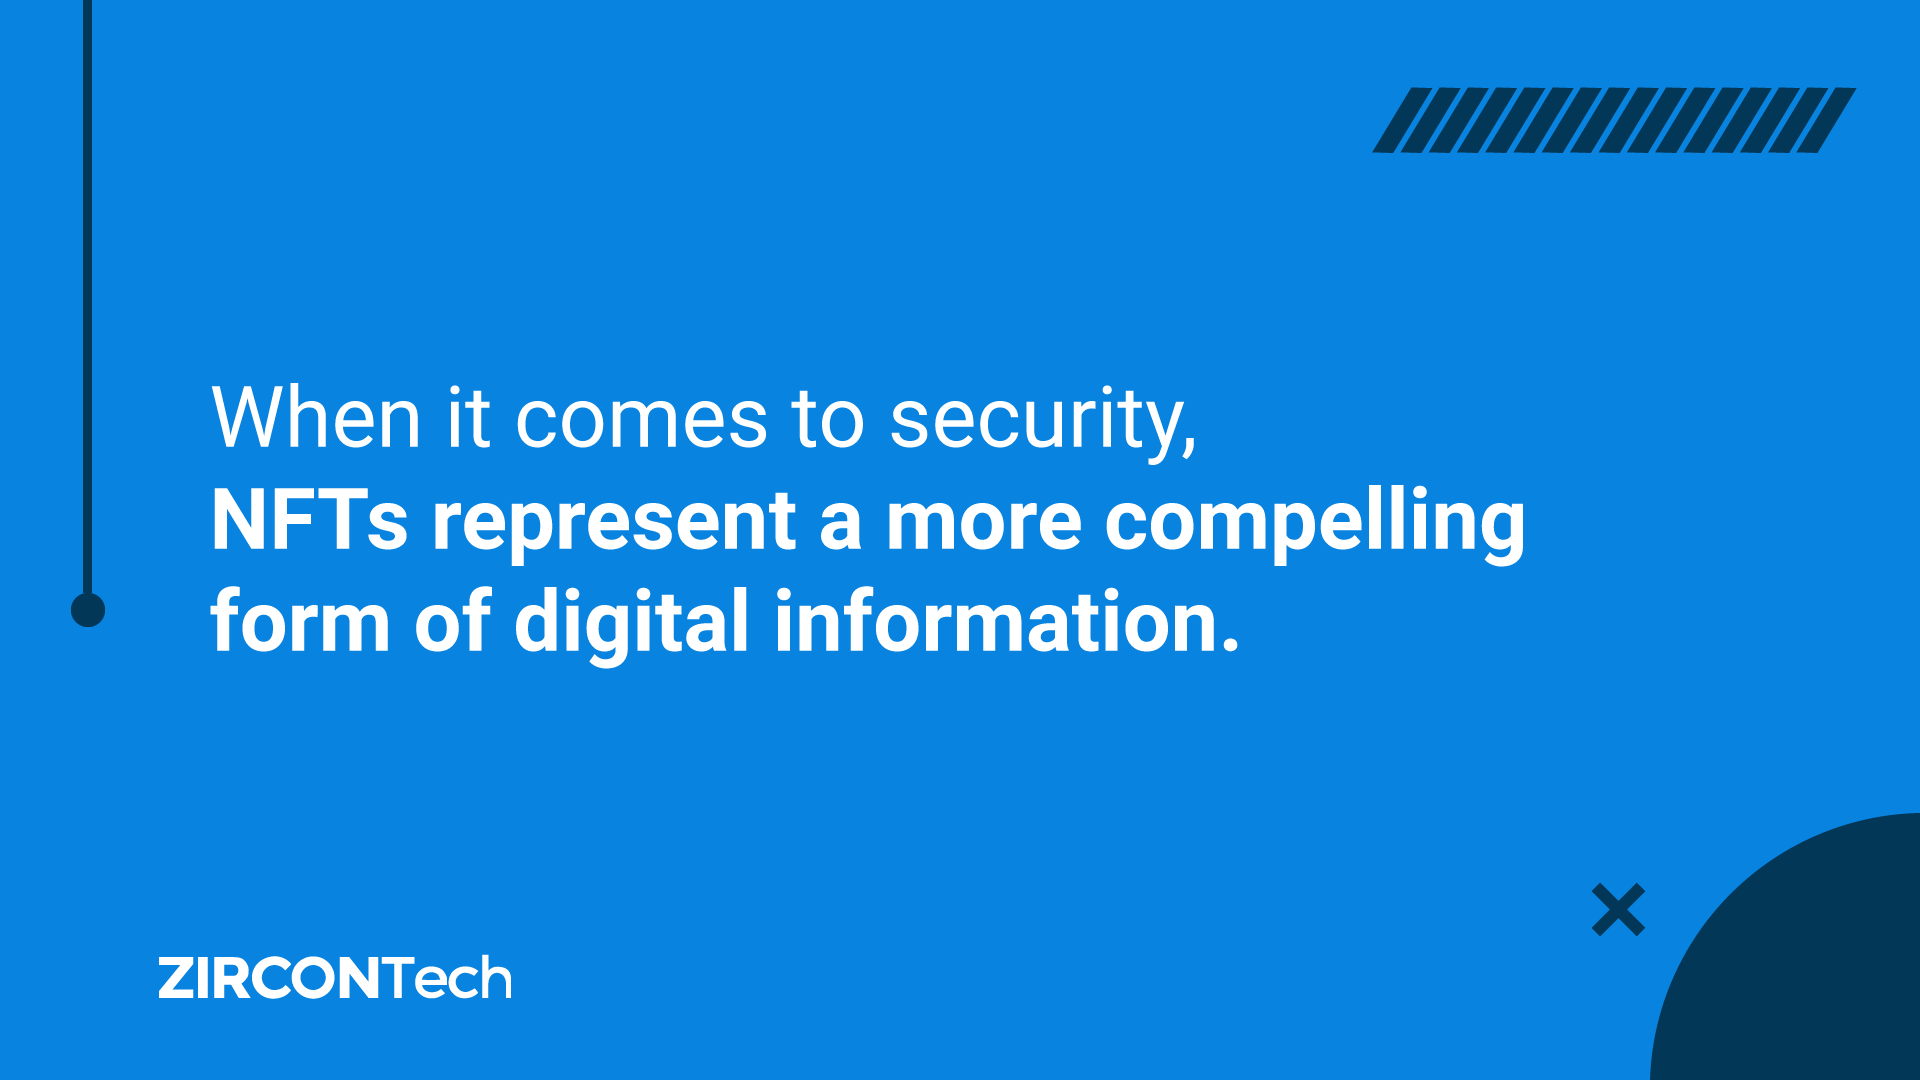 When it comes to security, NFTs represent a more compelling form of digital information.